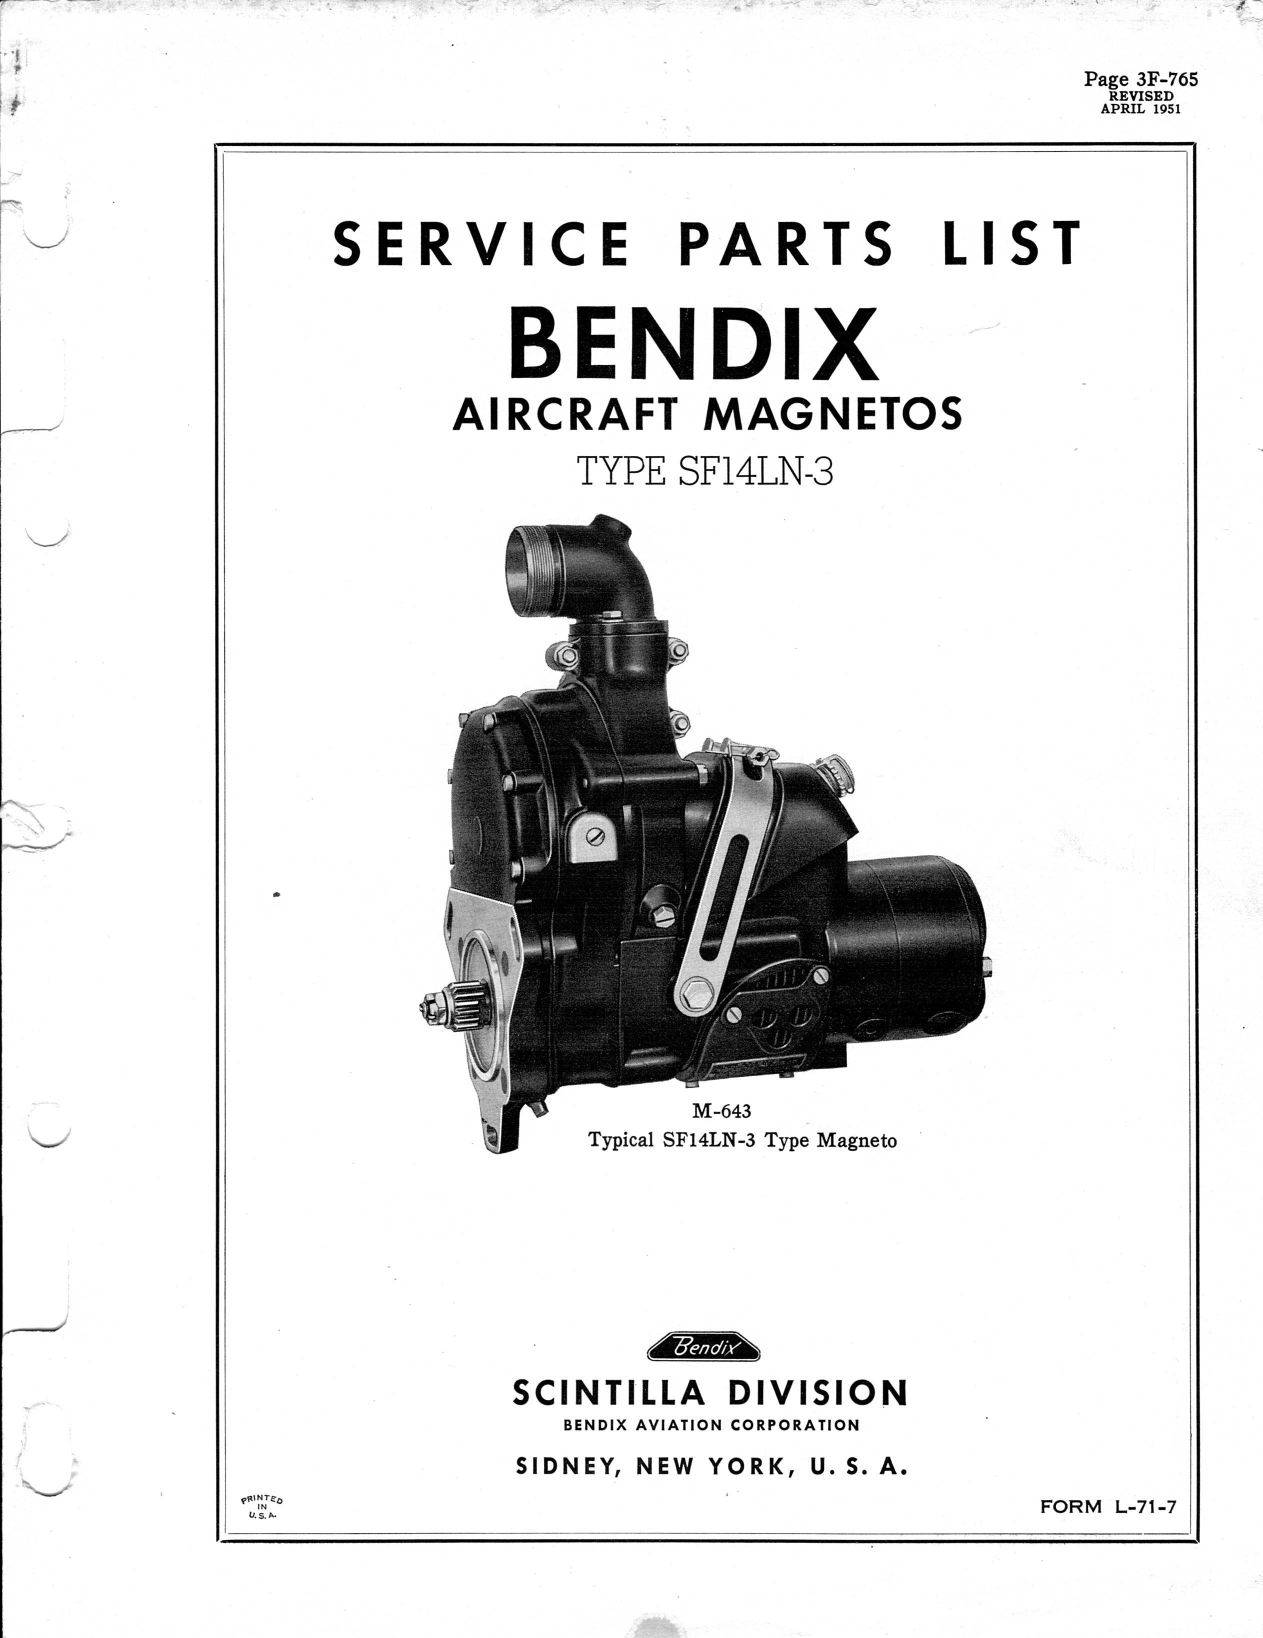 Sample page 1 from AirCorps Library document: Service Parts List for Bendix Scintilla Magnetos - Type SF14LN-3 - M-643